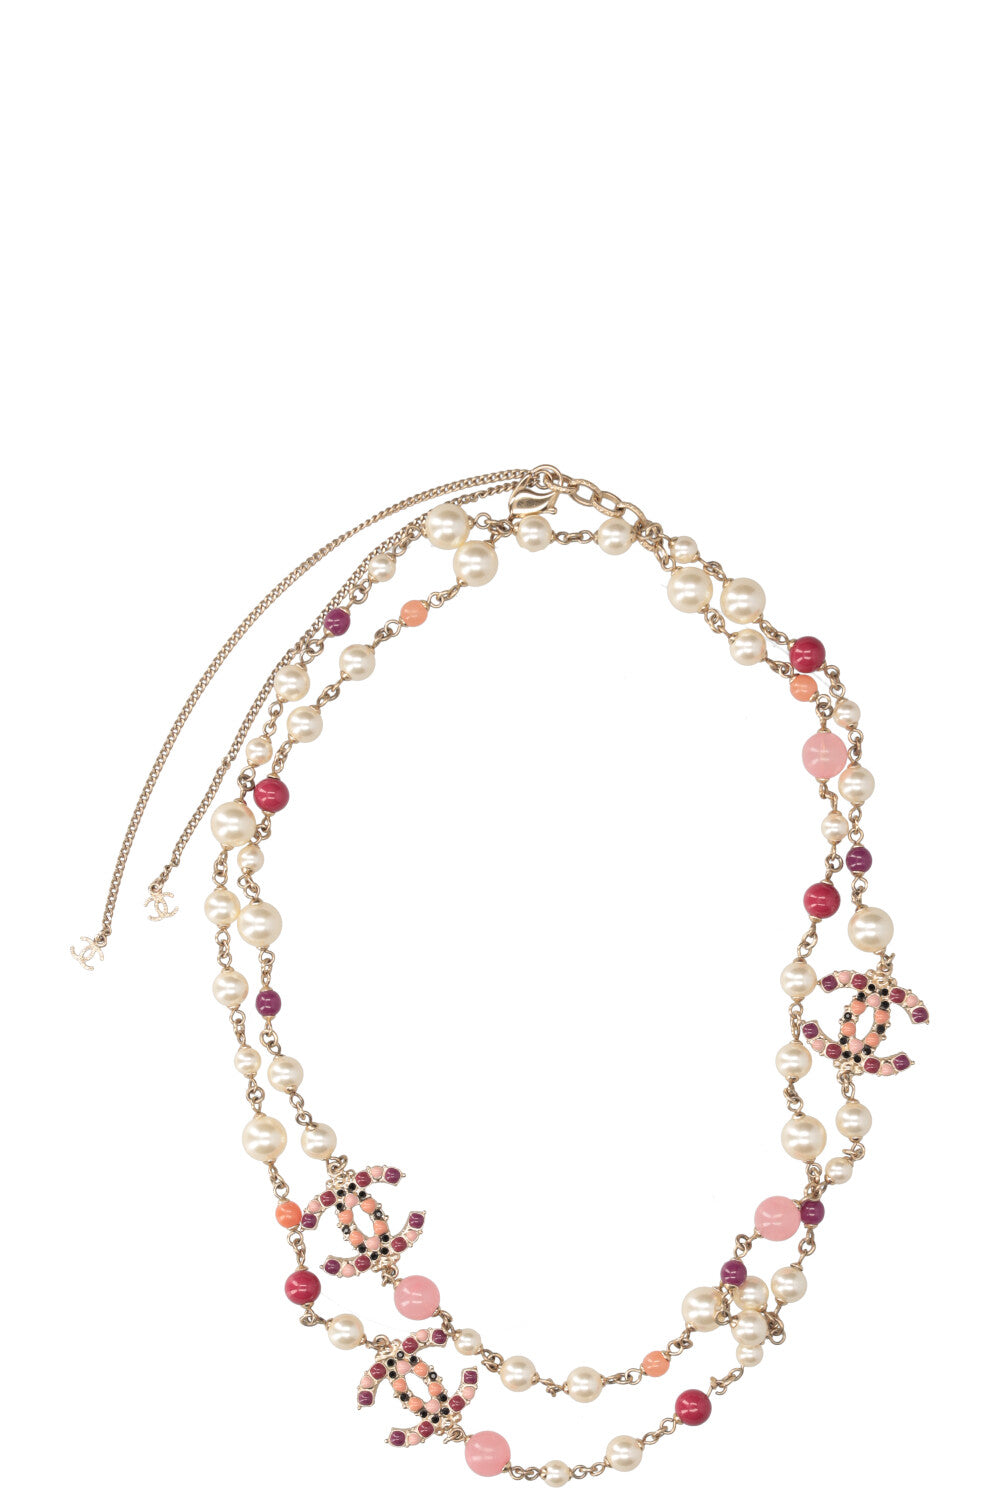 CHANEL Interlock CC Necklace Faux Pearls Pink